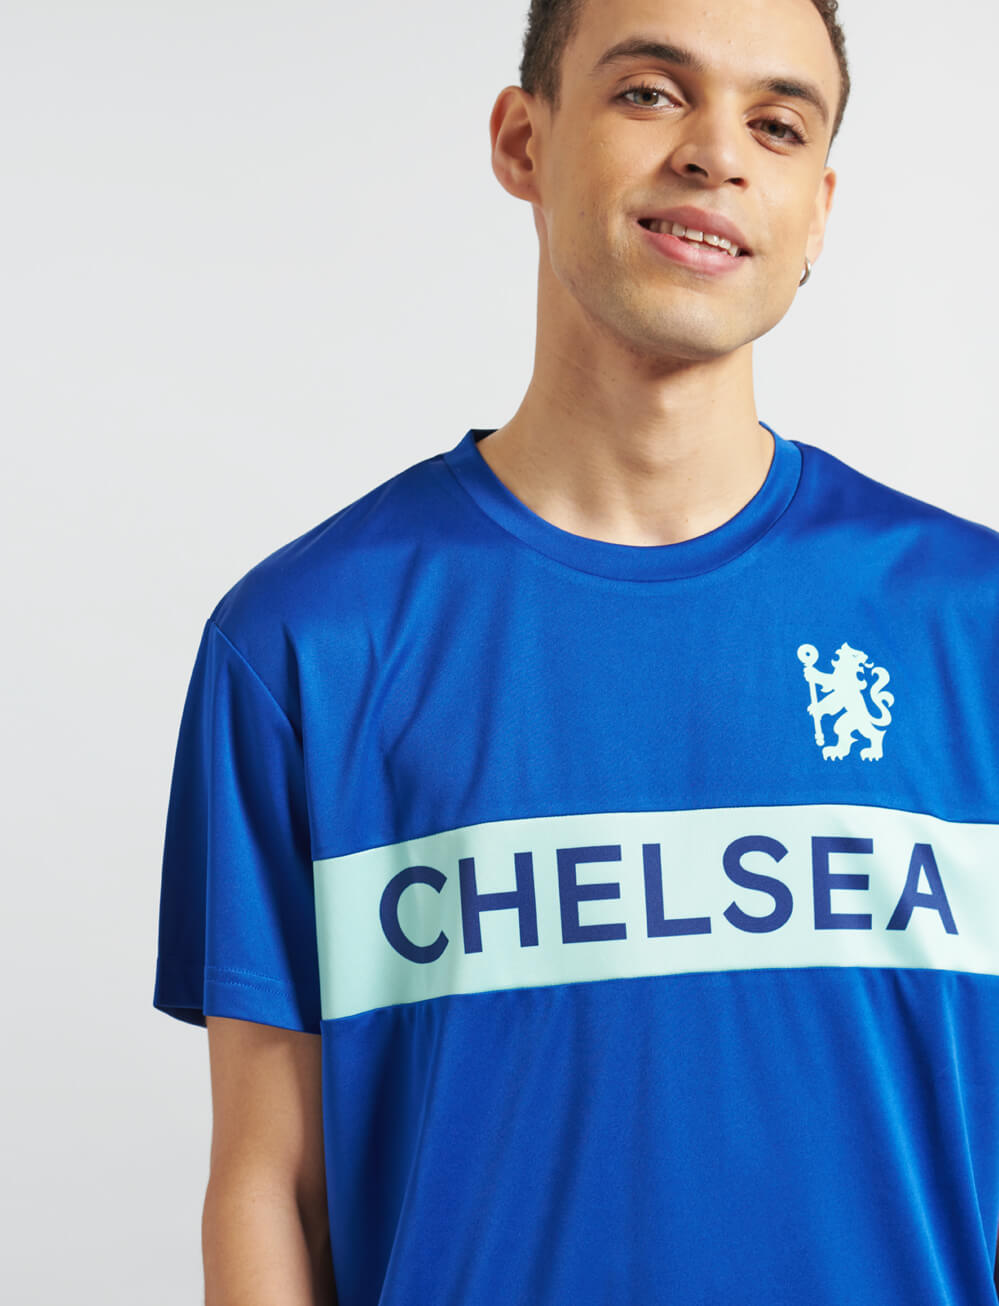 Official Chelsea Wordmark T-Shirt - Royal Blue - The World Football Store